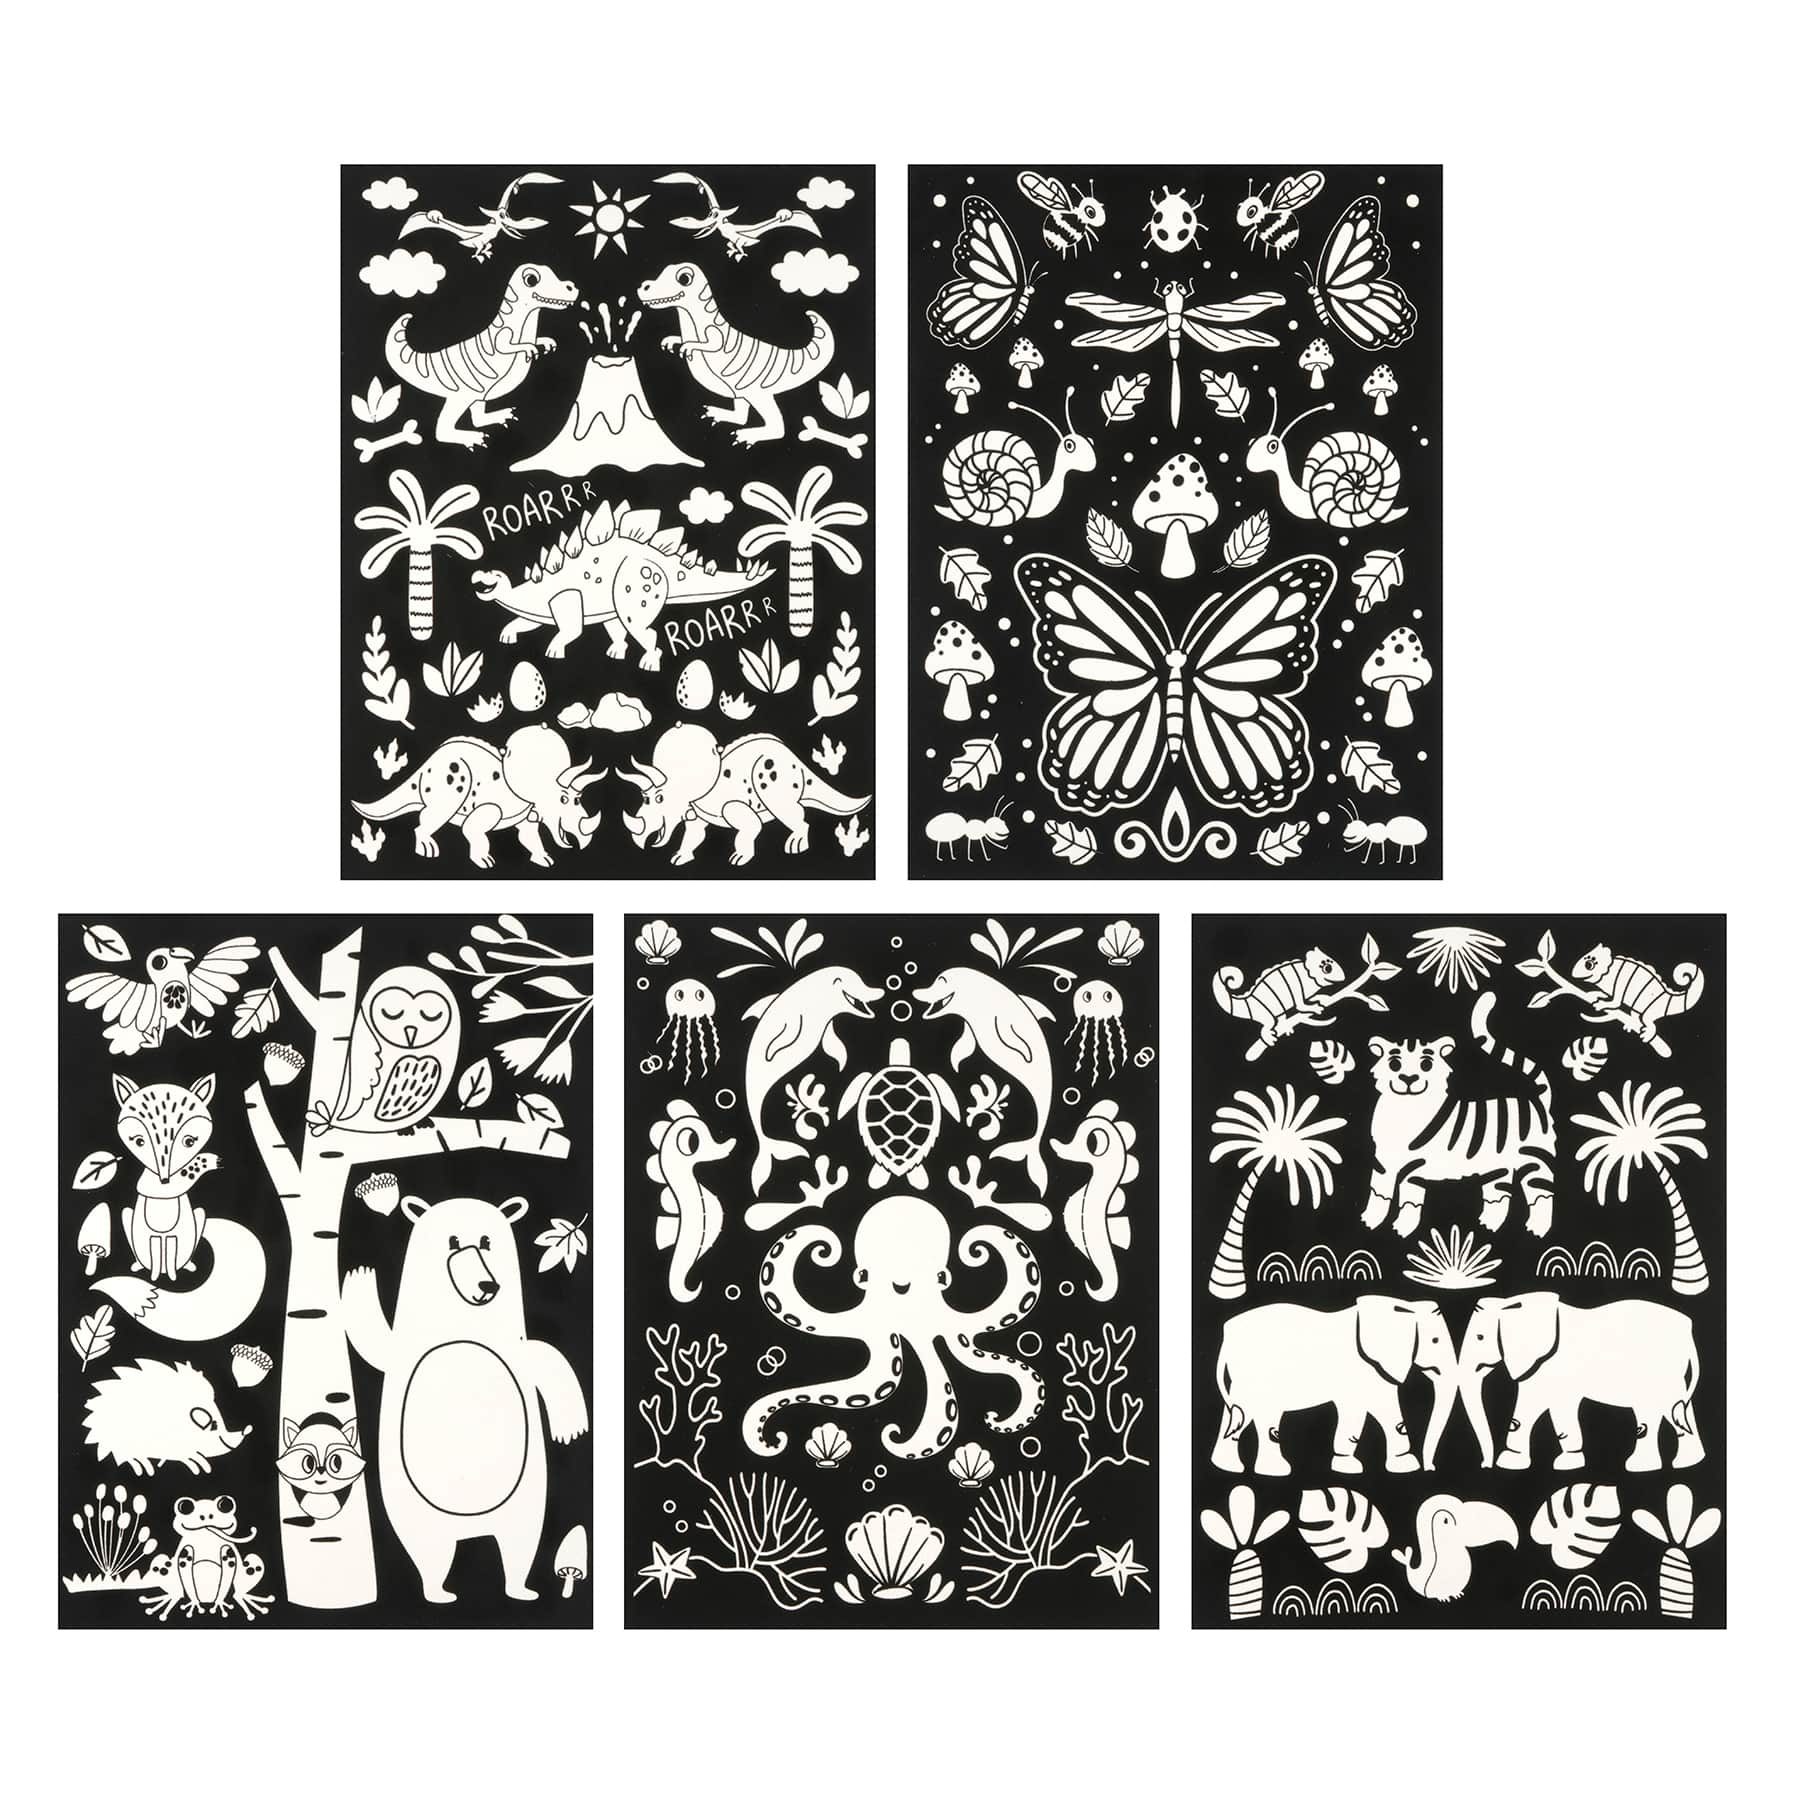 Tangles - 6 Pack of 8x10 inch Fuzzy Velvet Coloring Posters